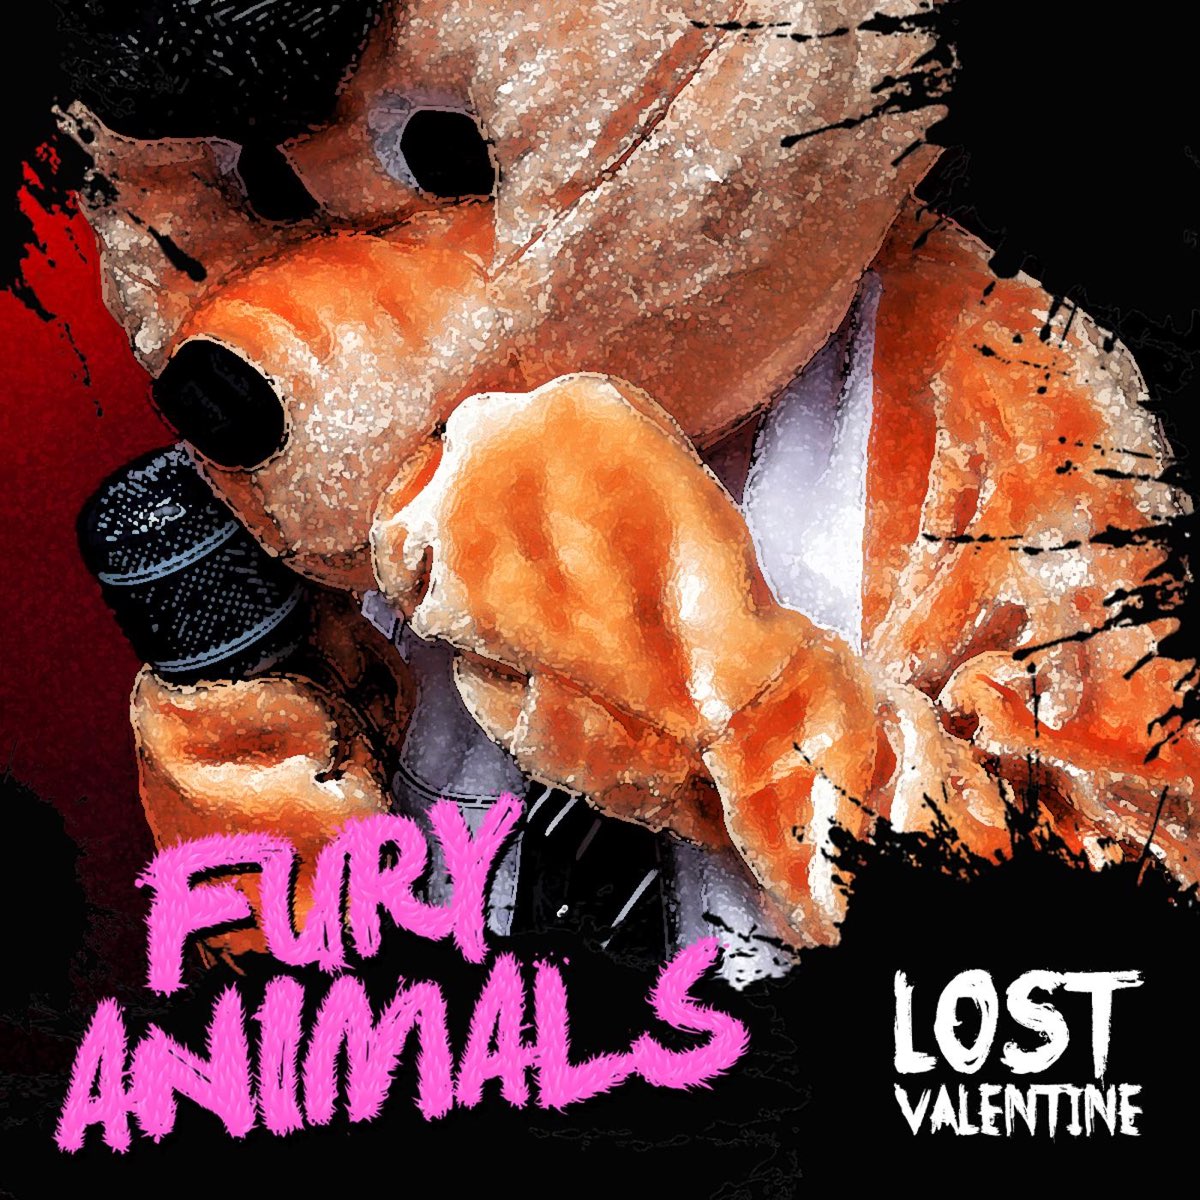 Lost the animals